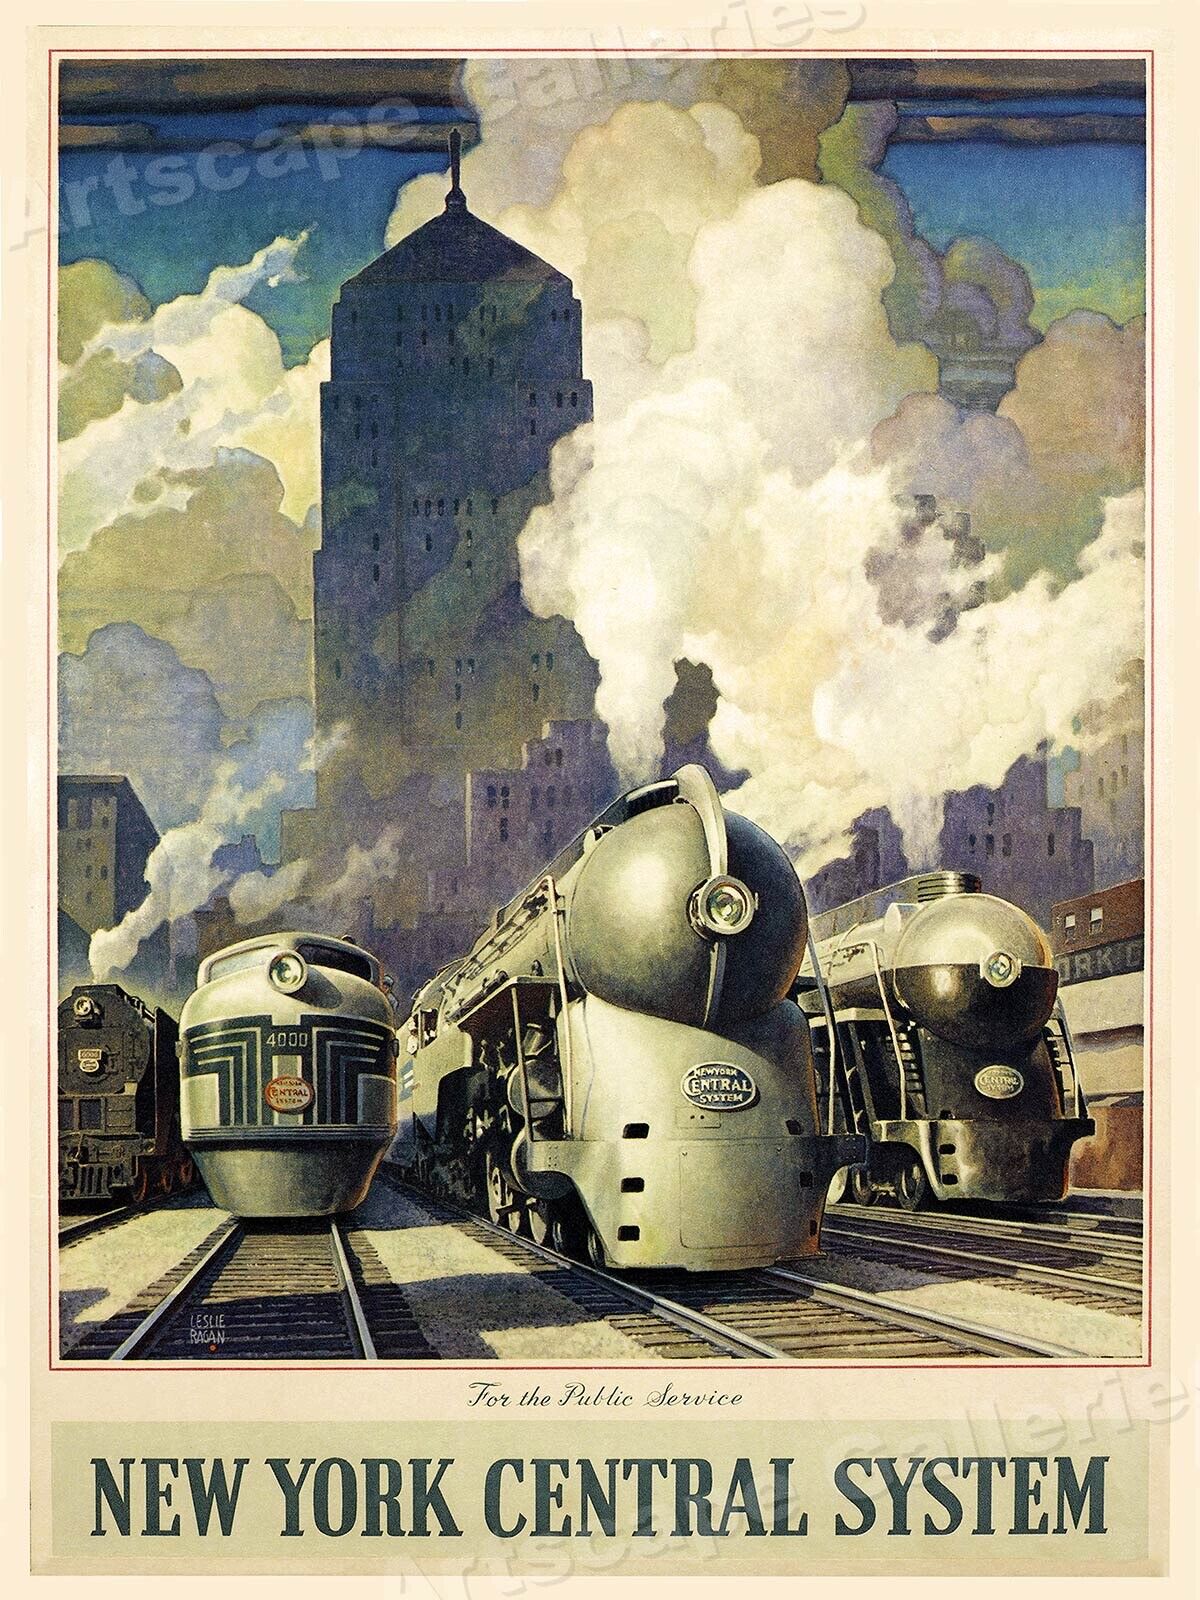 New York Central System 1940s Vintage Style Railroad Poster - 18x24